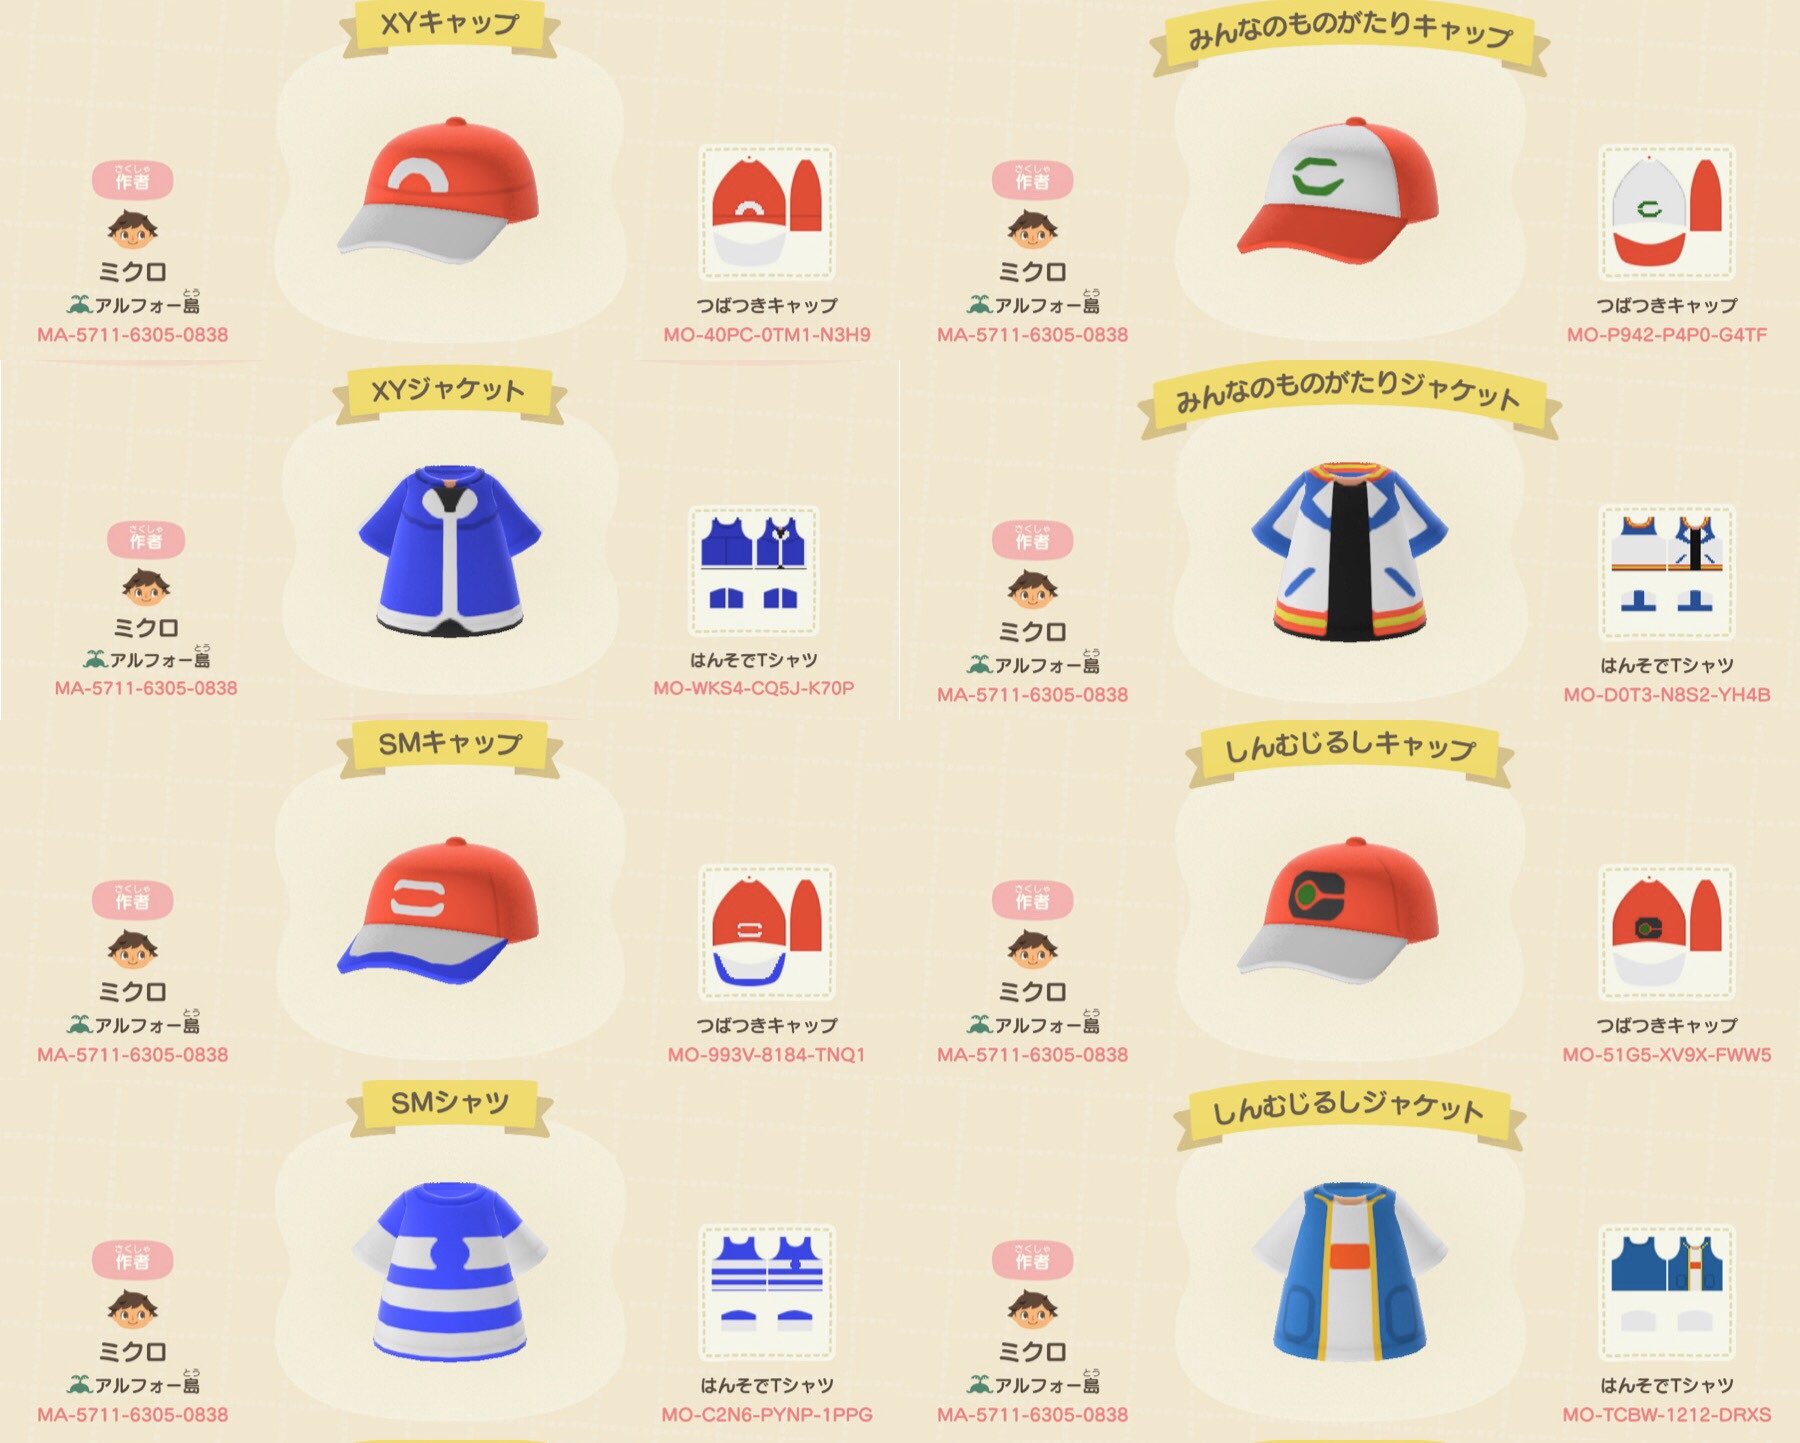 Animal Crossing New Horizons Be The Very Best Like No One Ever Was With These Fan Made Pokemon Outfits Imore